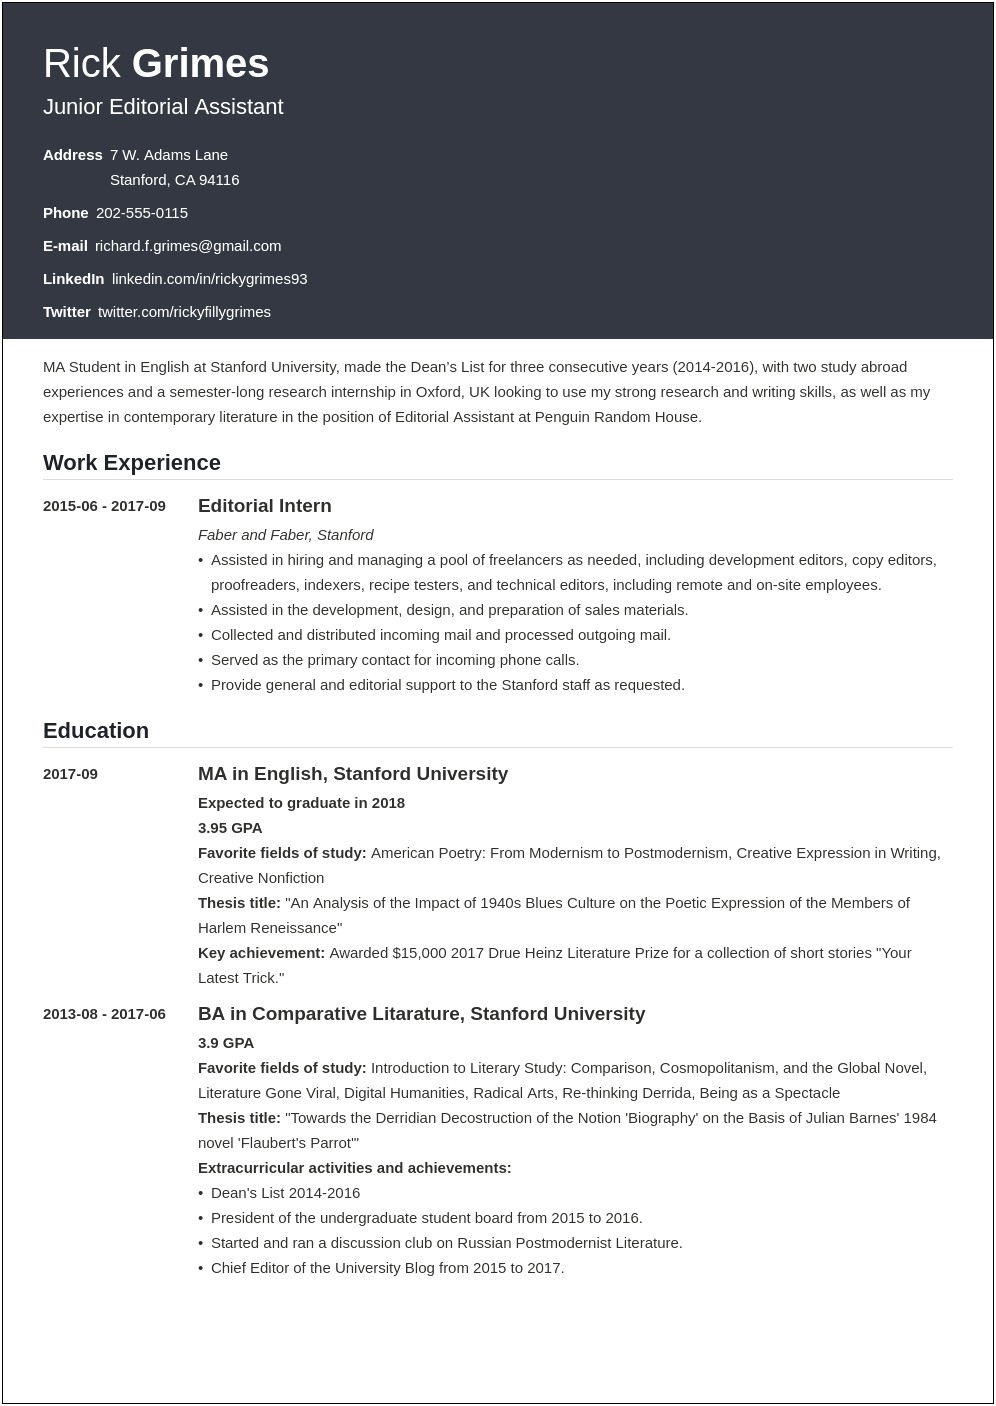 Resume Summary Or Objective Examples